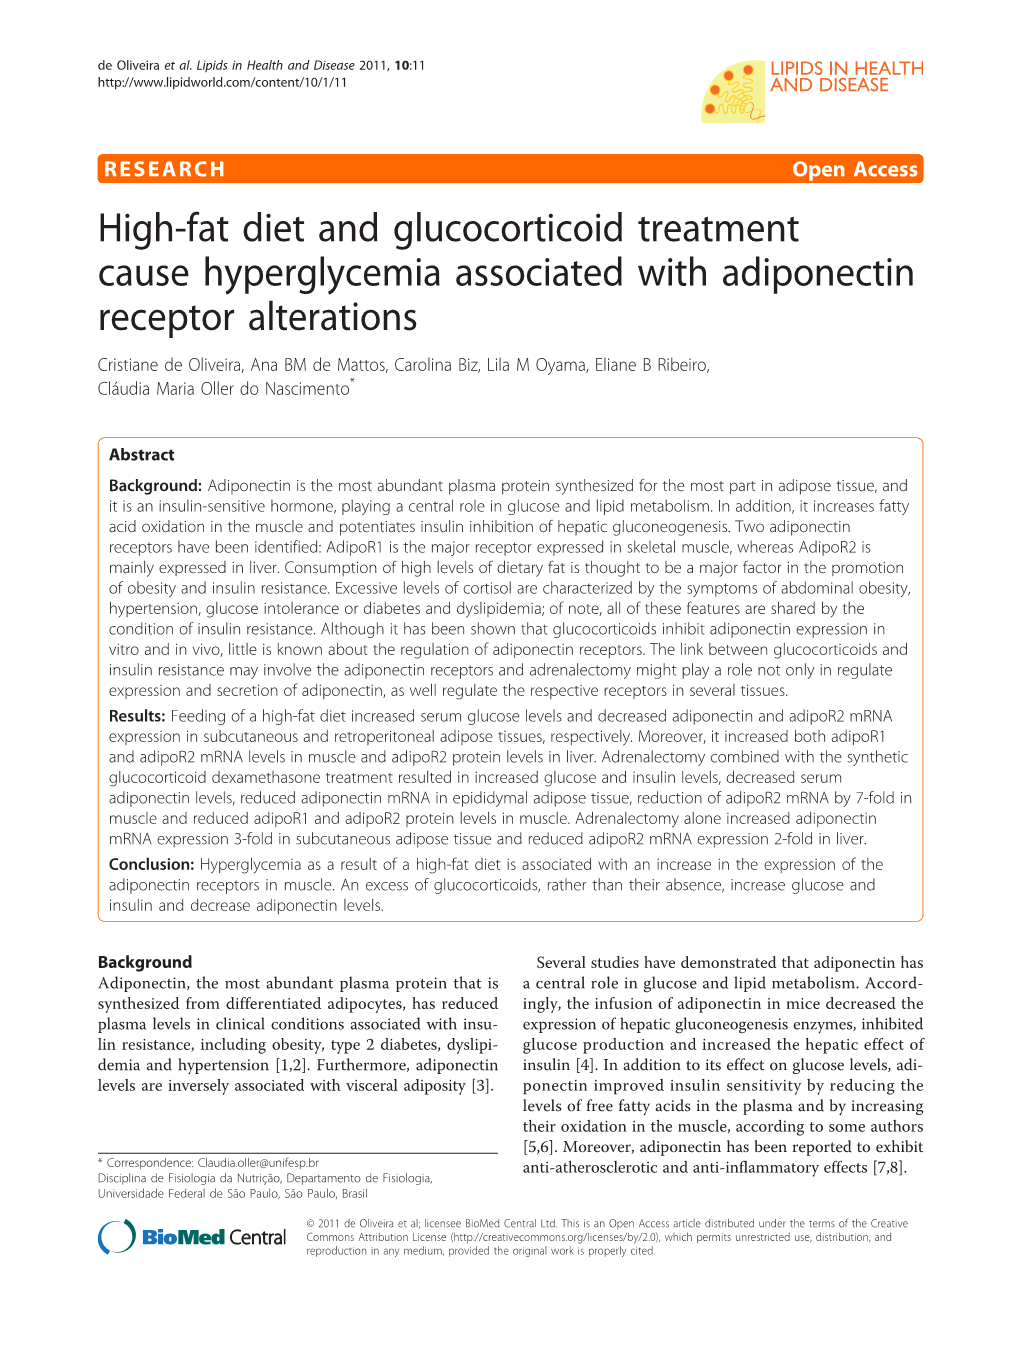 High-Fat Diet and Glucocorticoid Treatment Cause Hyperglycemia